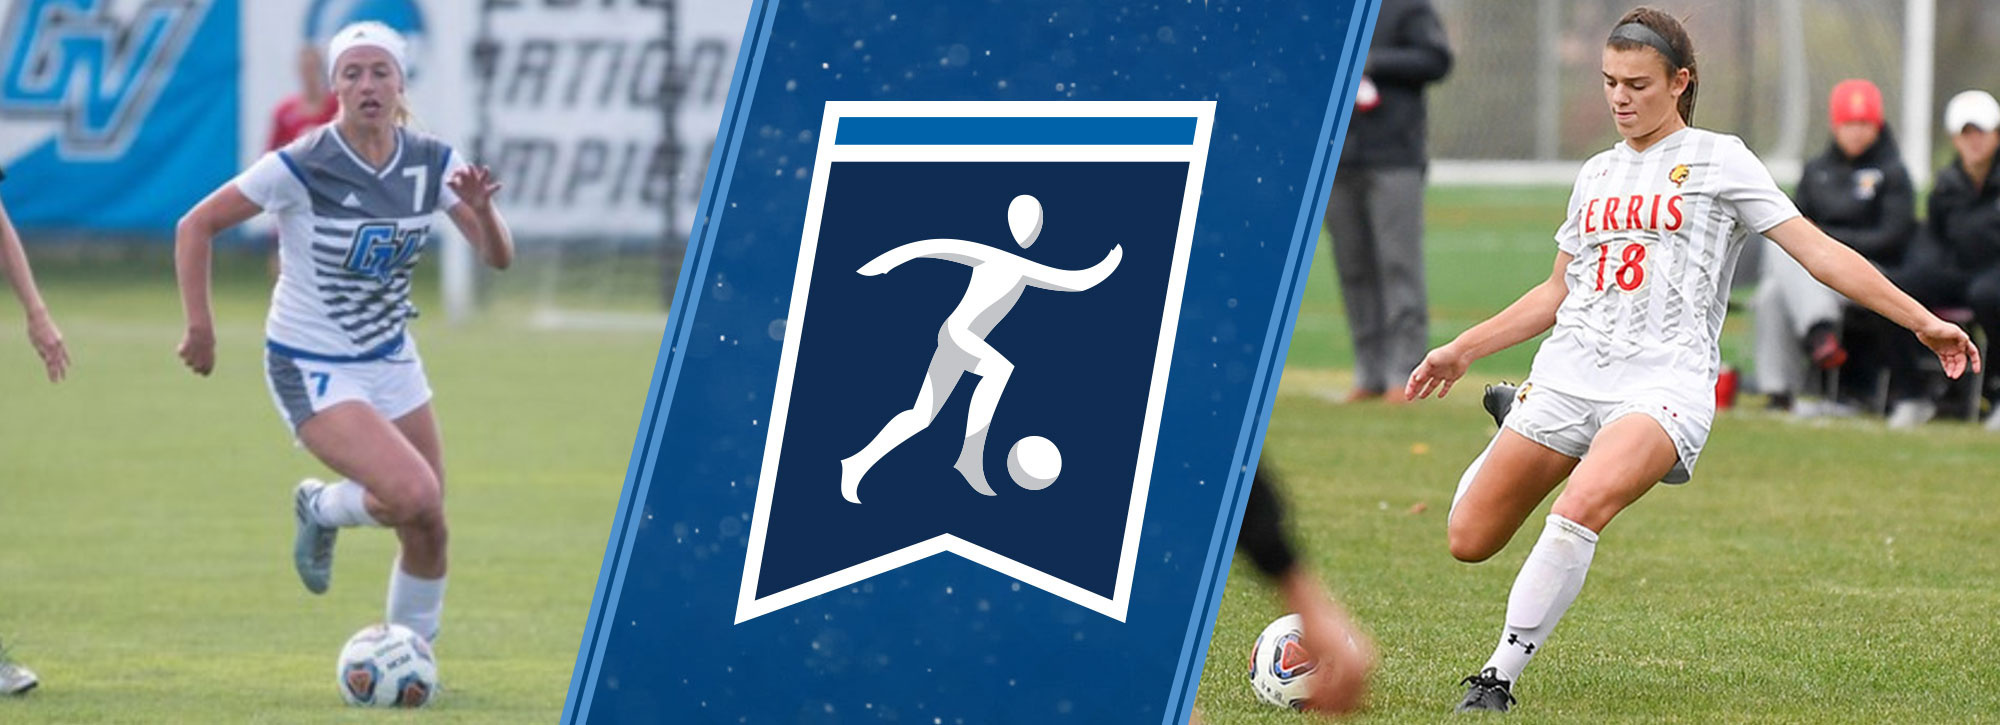 Grand Valley State & Ferris State to Clash in NCAA Women's Soccer Midwest Regional Final